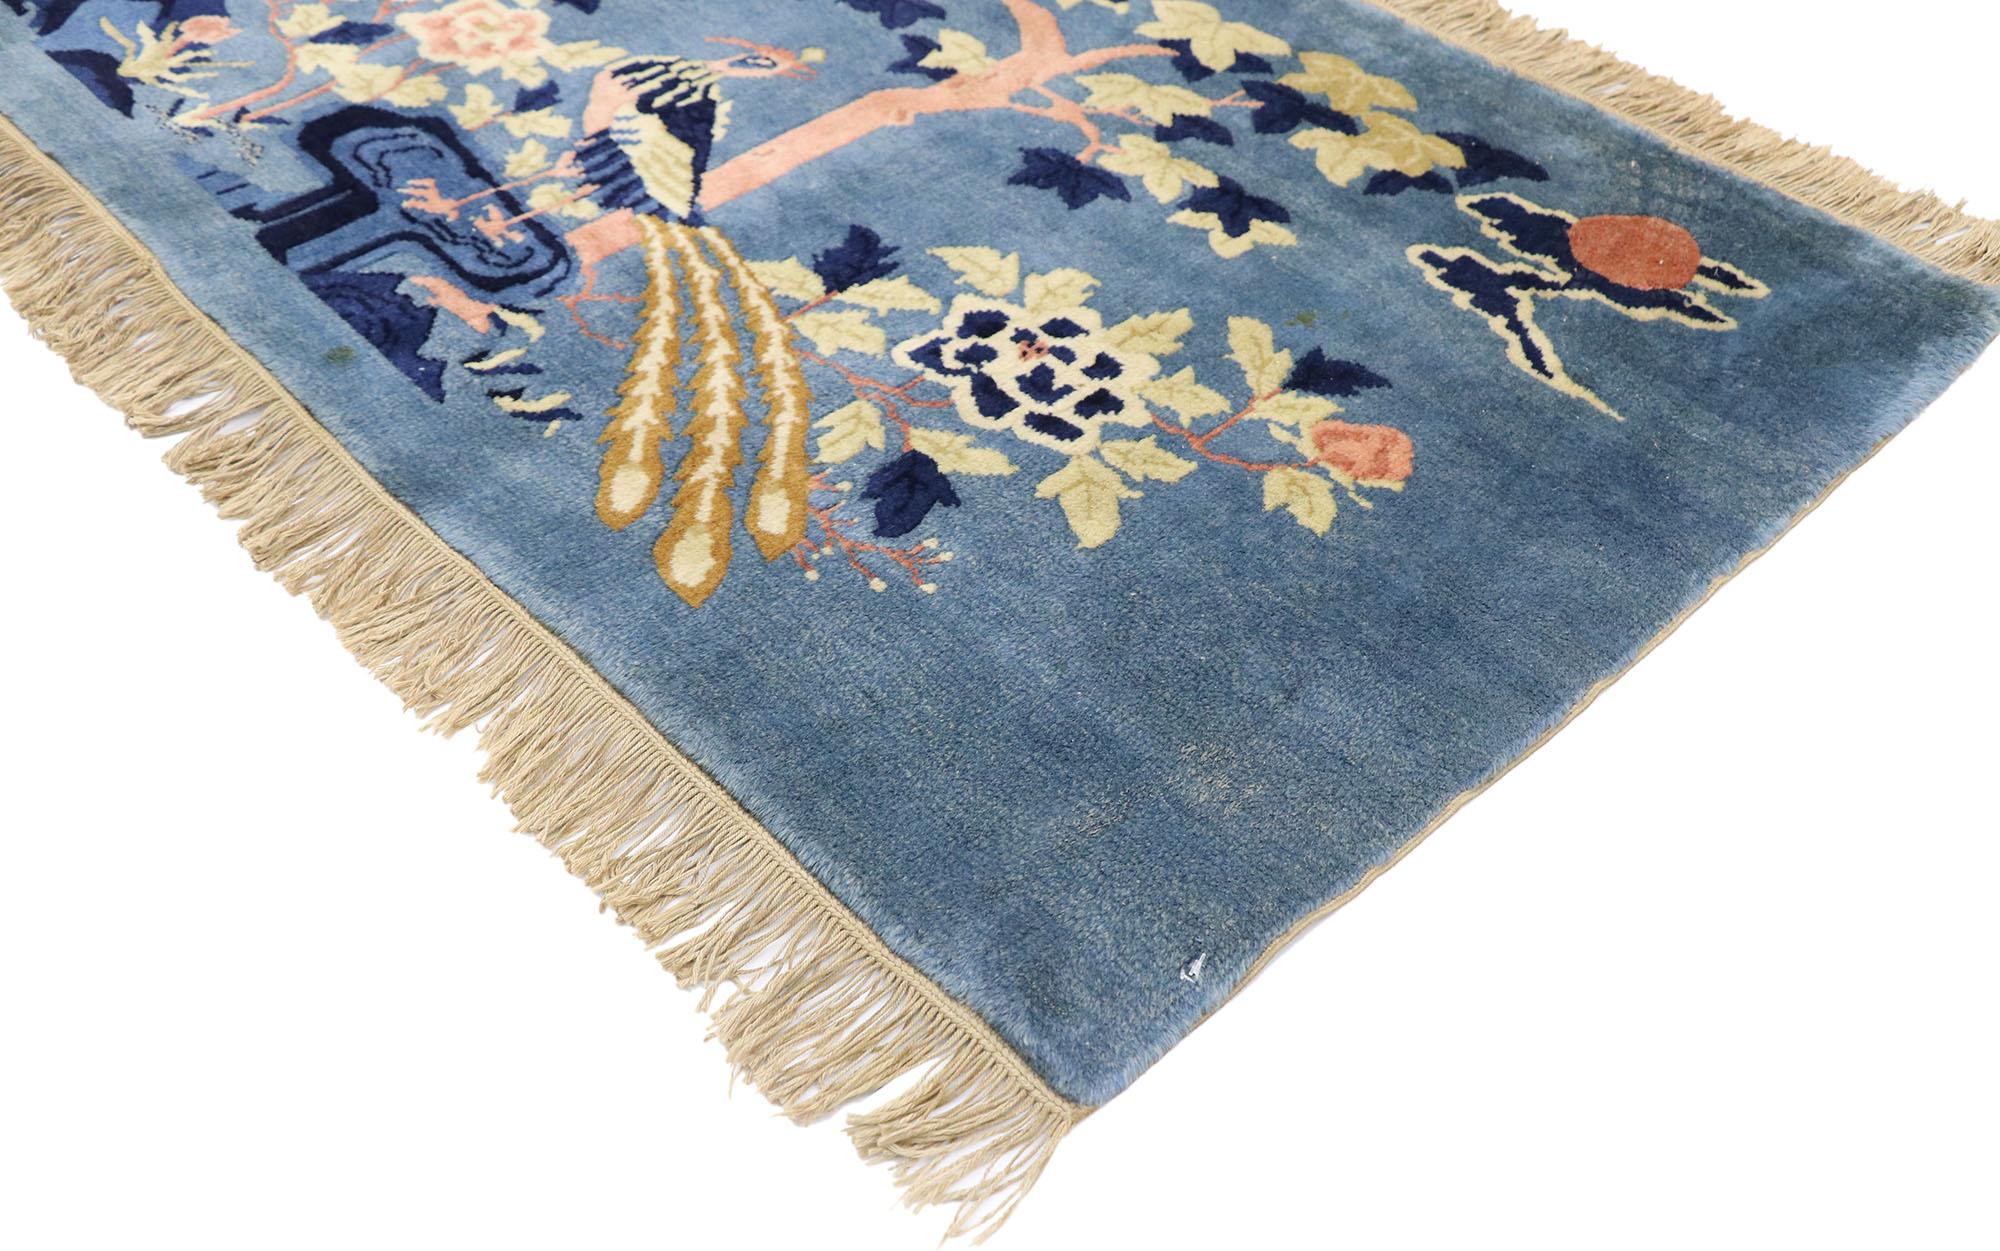 77585 Antique Chinese Art Deco Pictorial rug with Chinoiserie Chic Style 02'04 x 04'07. This hand knotted wool antique Chinese Baotou rug features a pictorial landscape scene with two phoenix birds set among a beautiful garden on a blue backdrop.